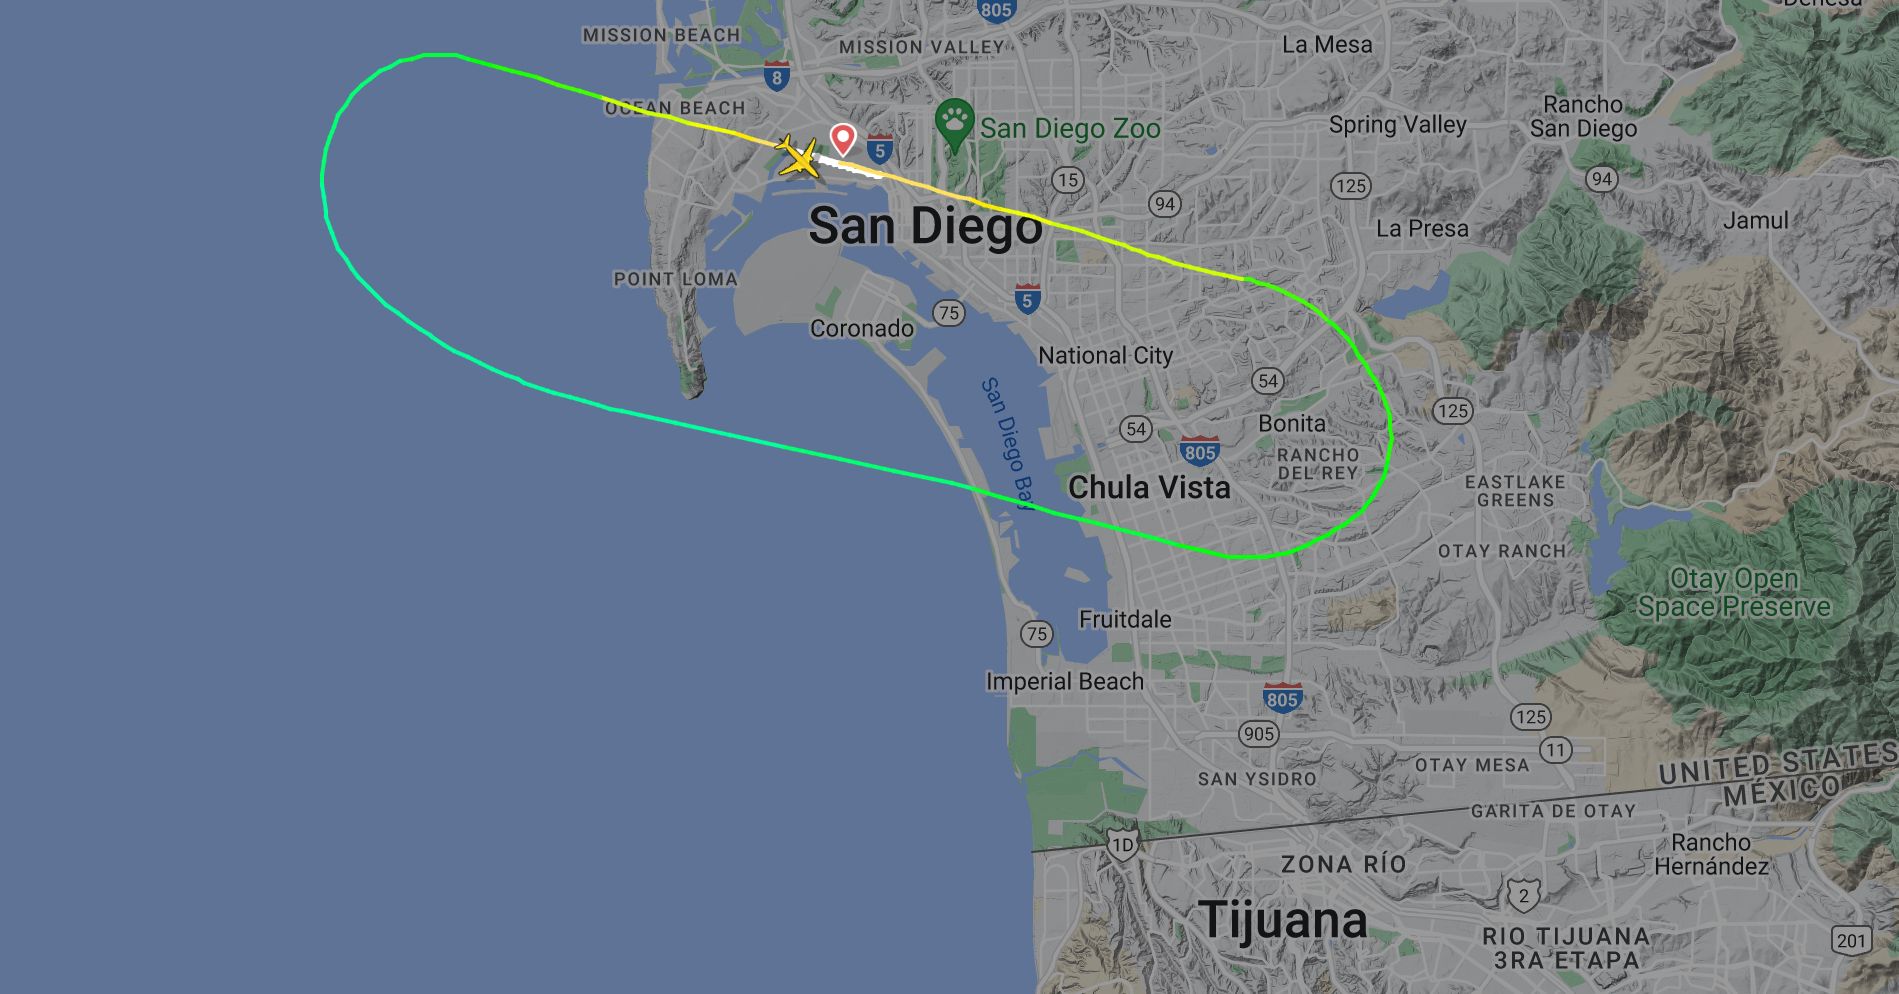 The United Airlines flight returned to San Diego following a fire